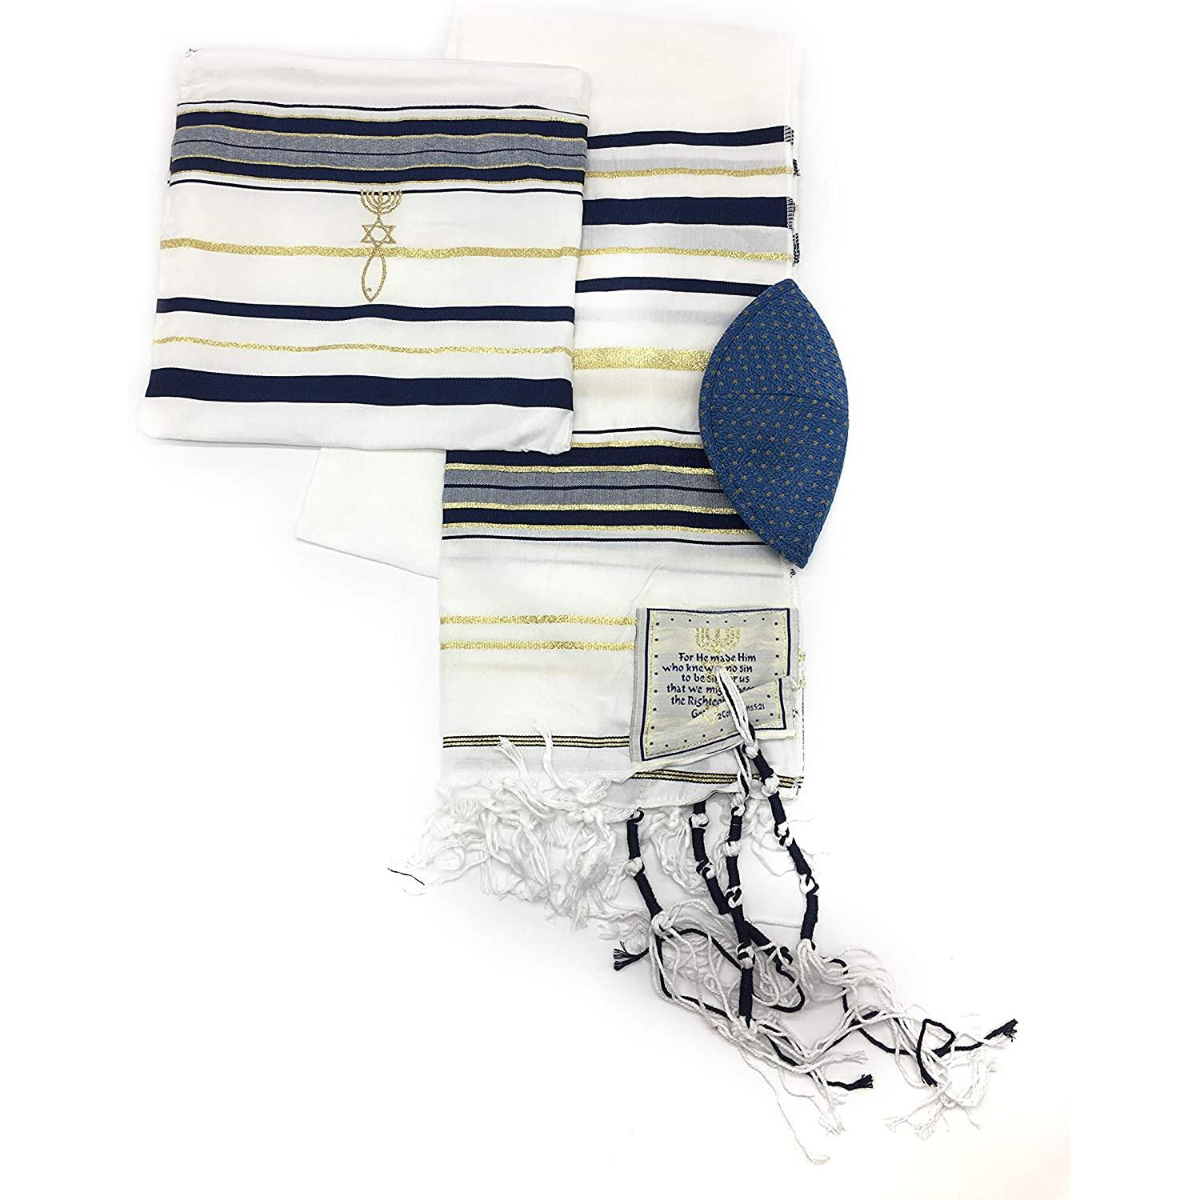 Messianic Tallit Prayer Shawl Covenant in English/Hebrew with Bag and Kippah